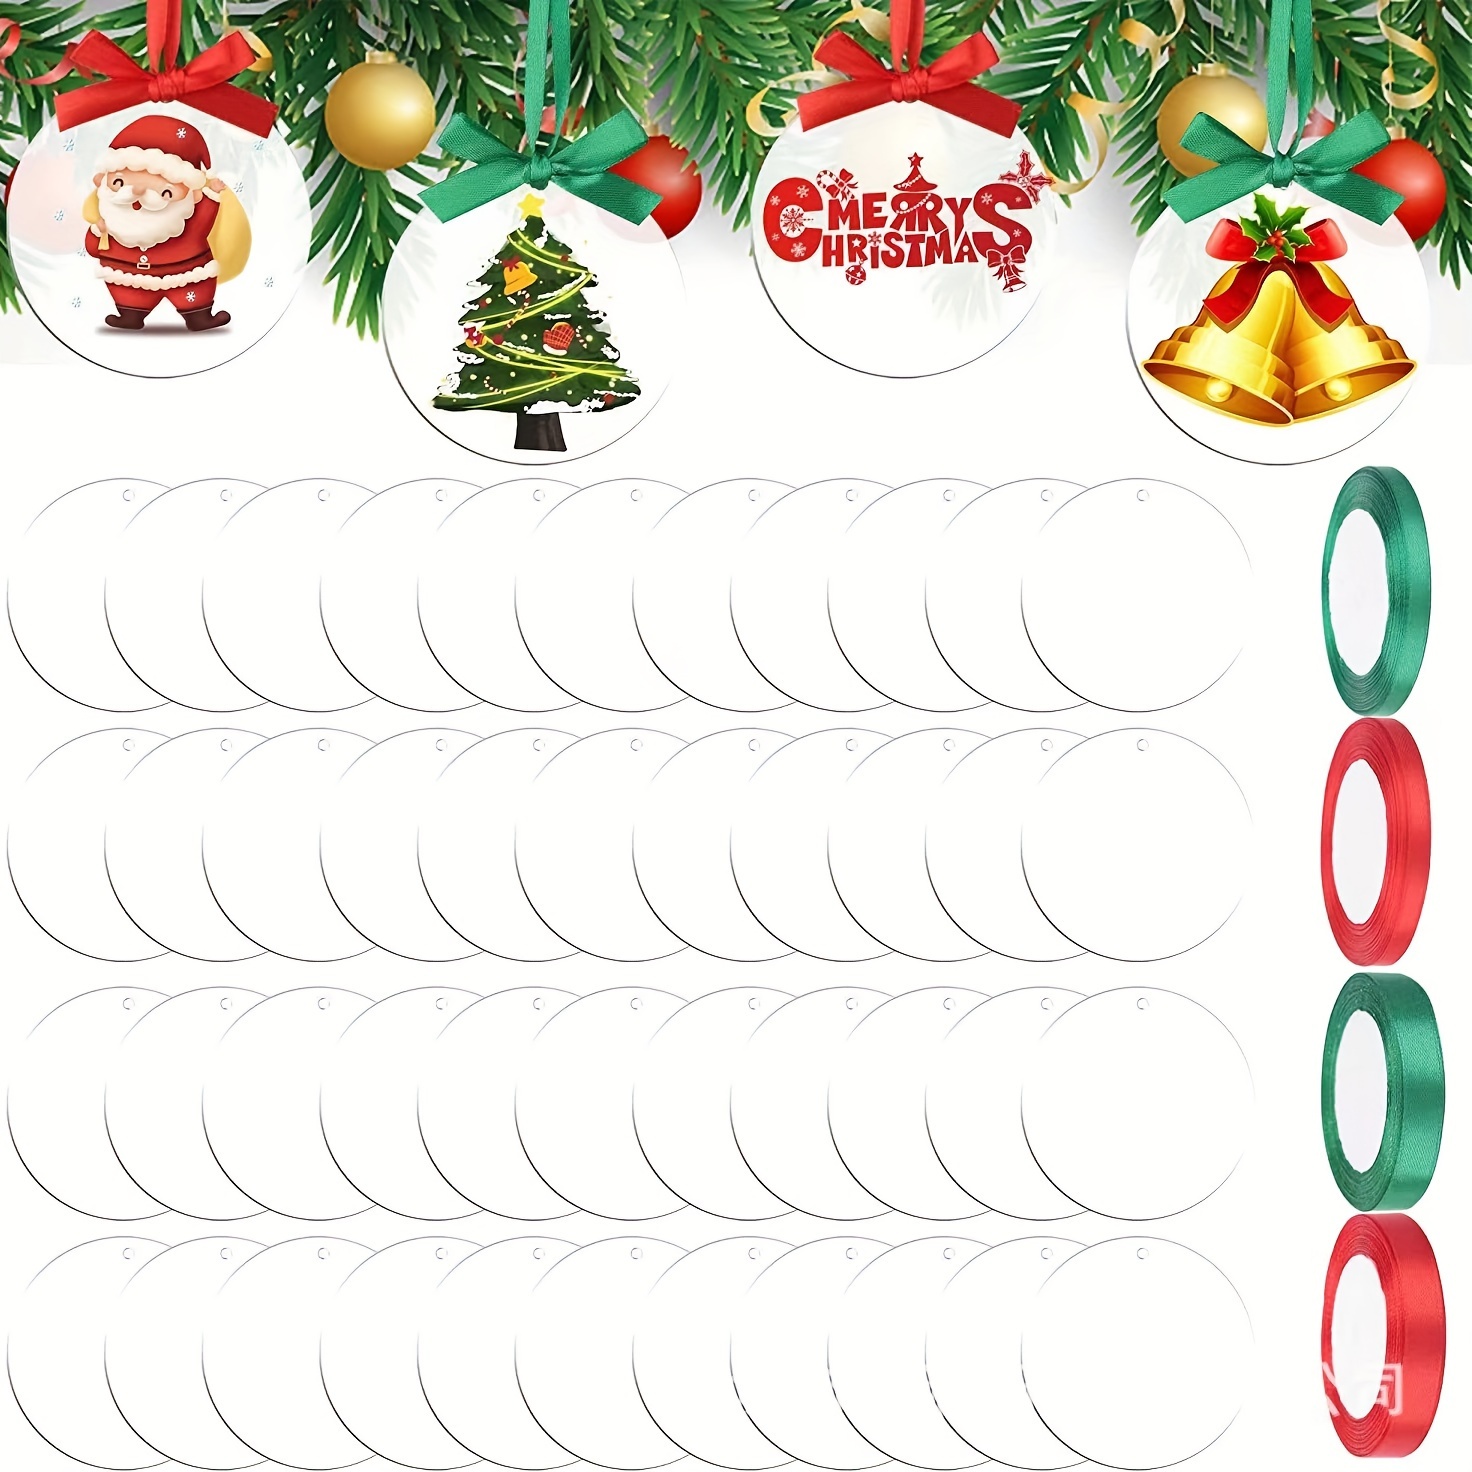 Acrylic Blanks, clear round circle discs for keychains, ornaments and